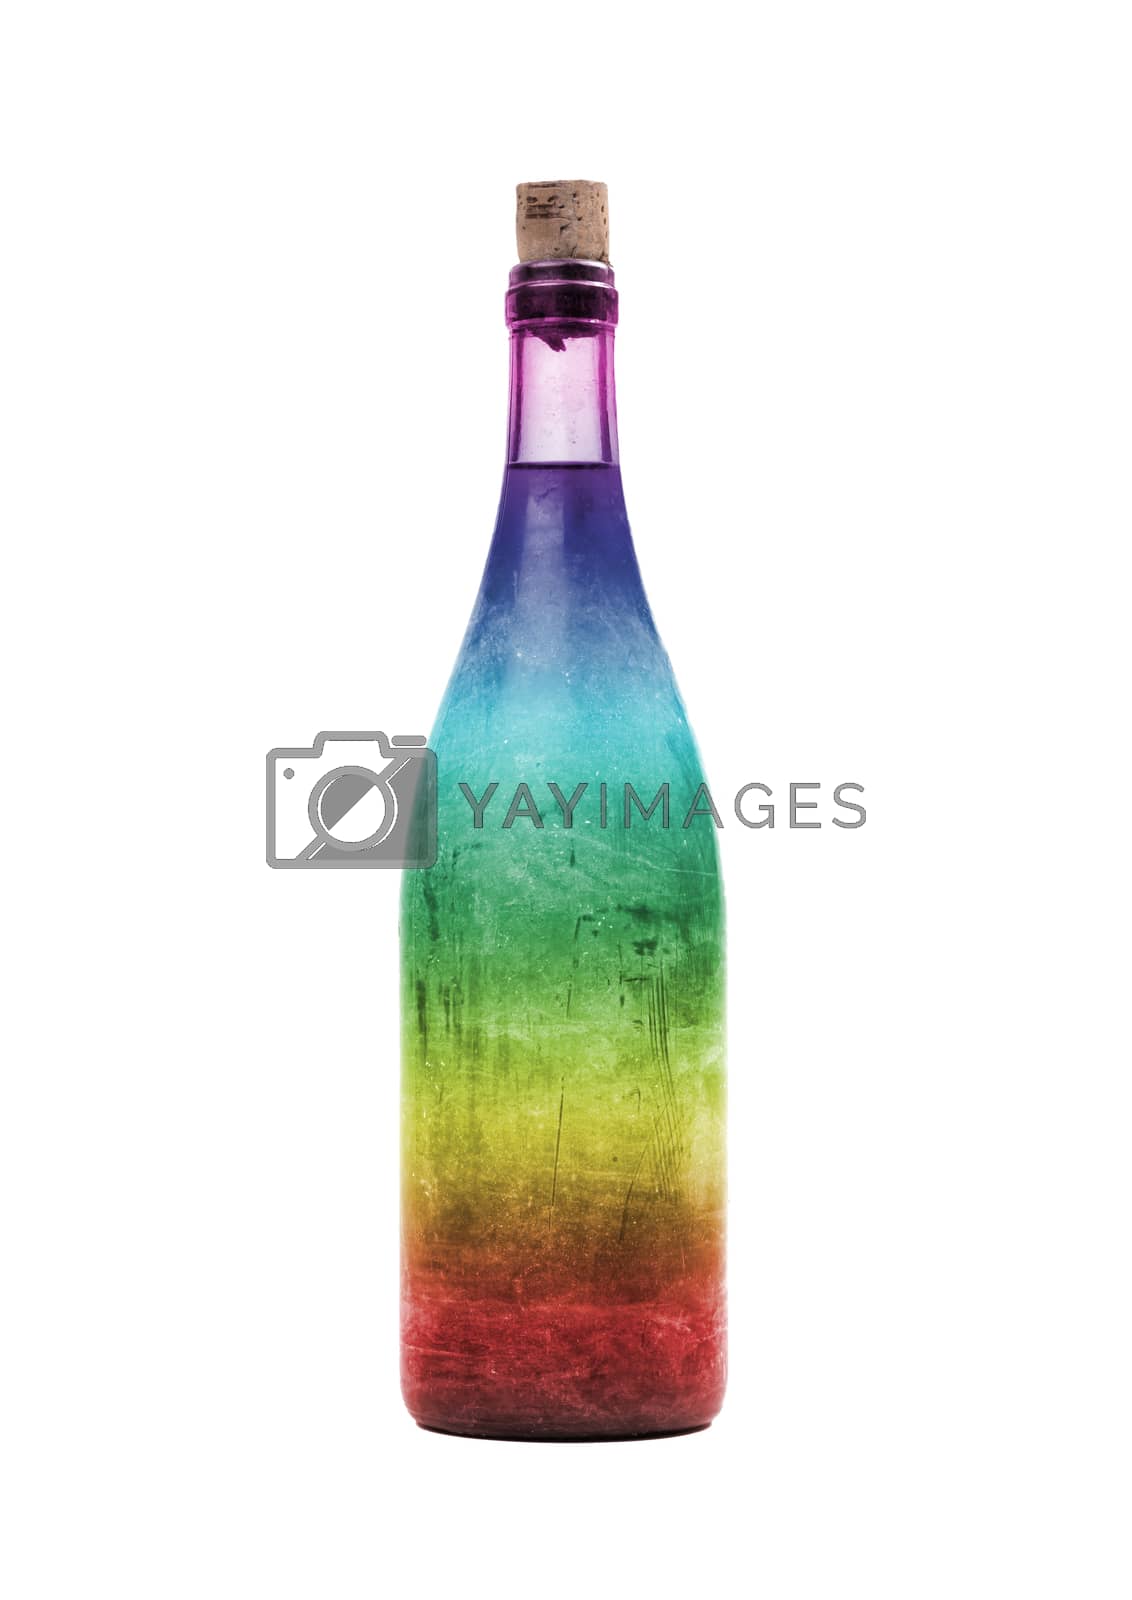 Royalty free image of Old bottle of wine in a rainbow colored bottle, covered in dust by michaklootwijk